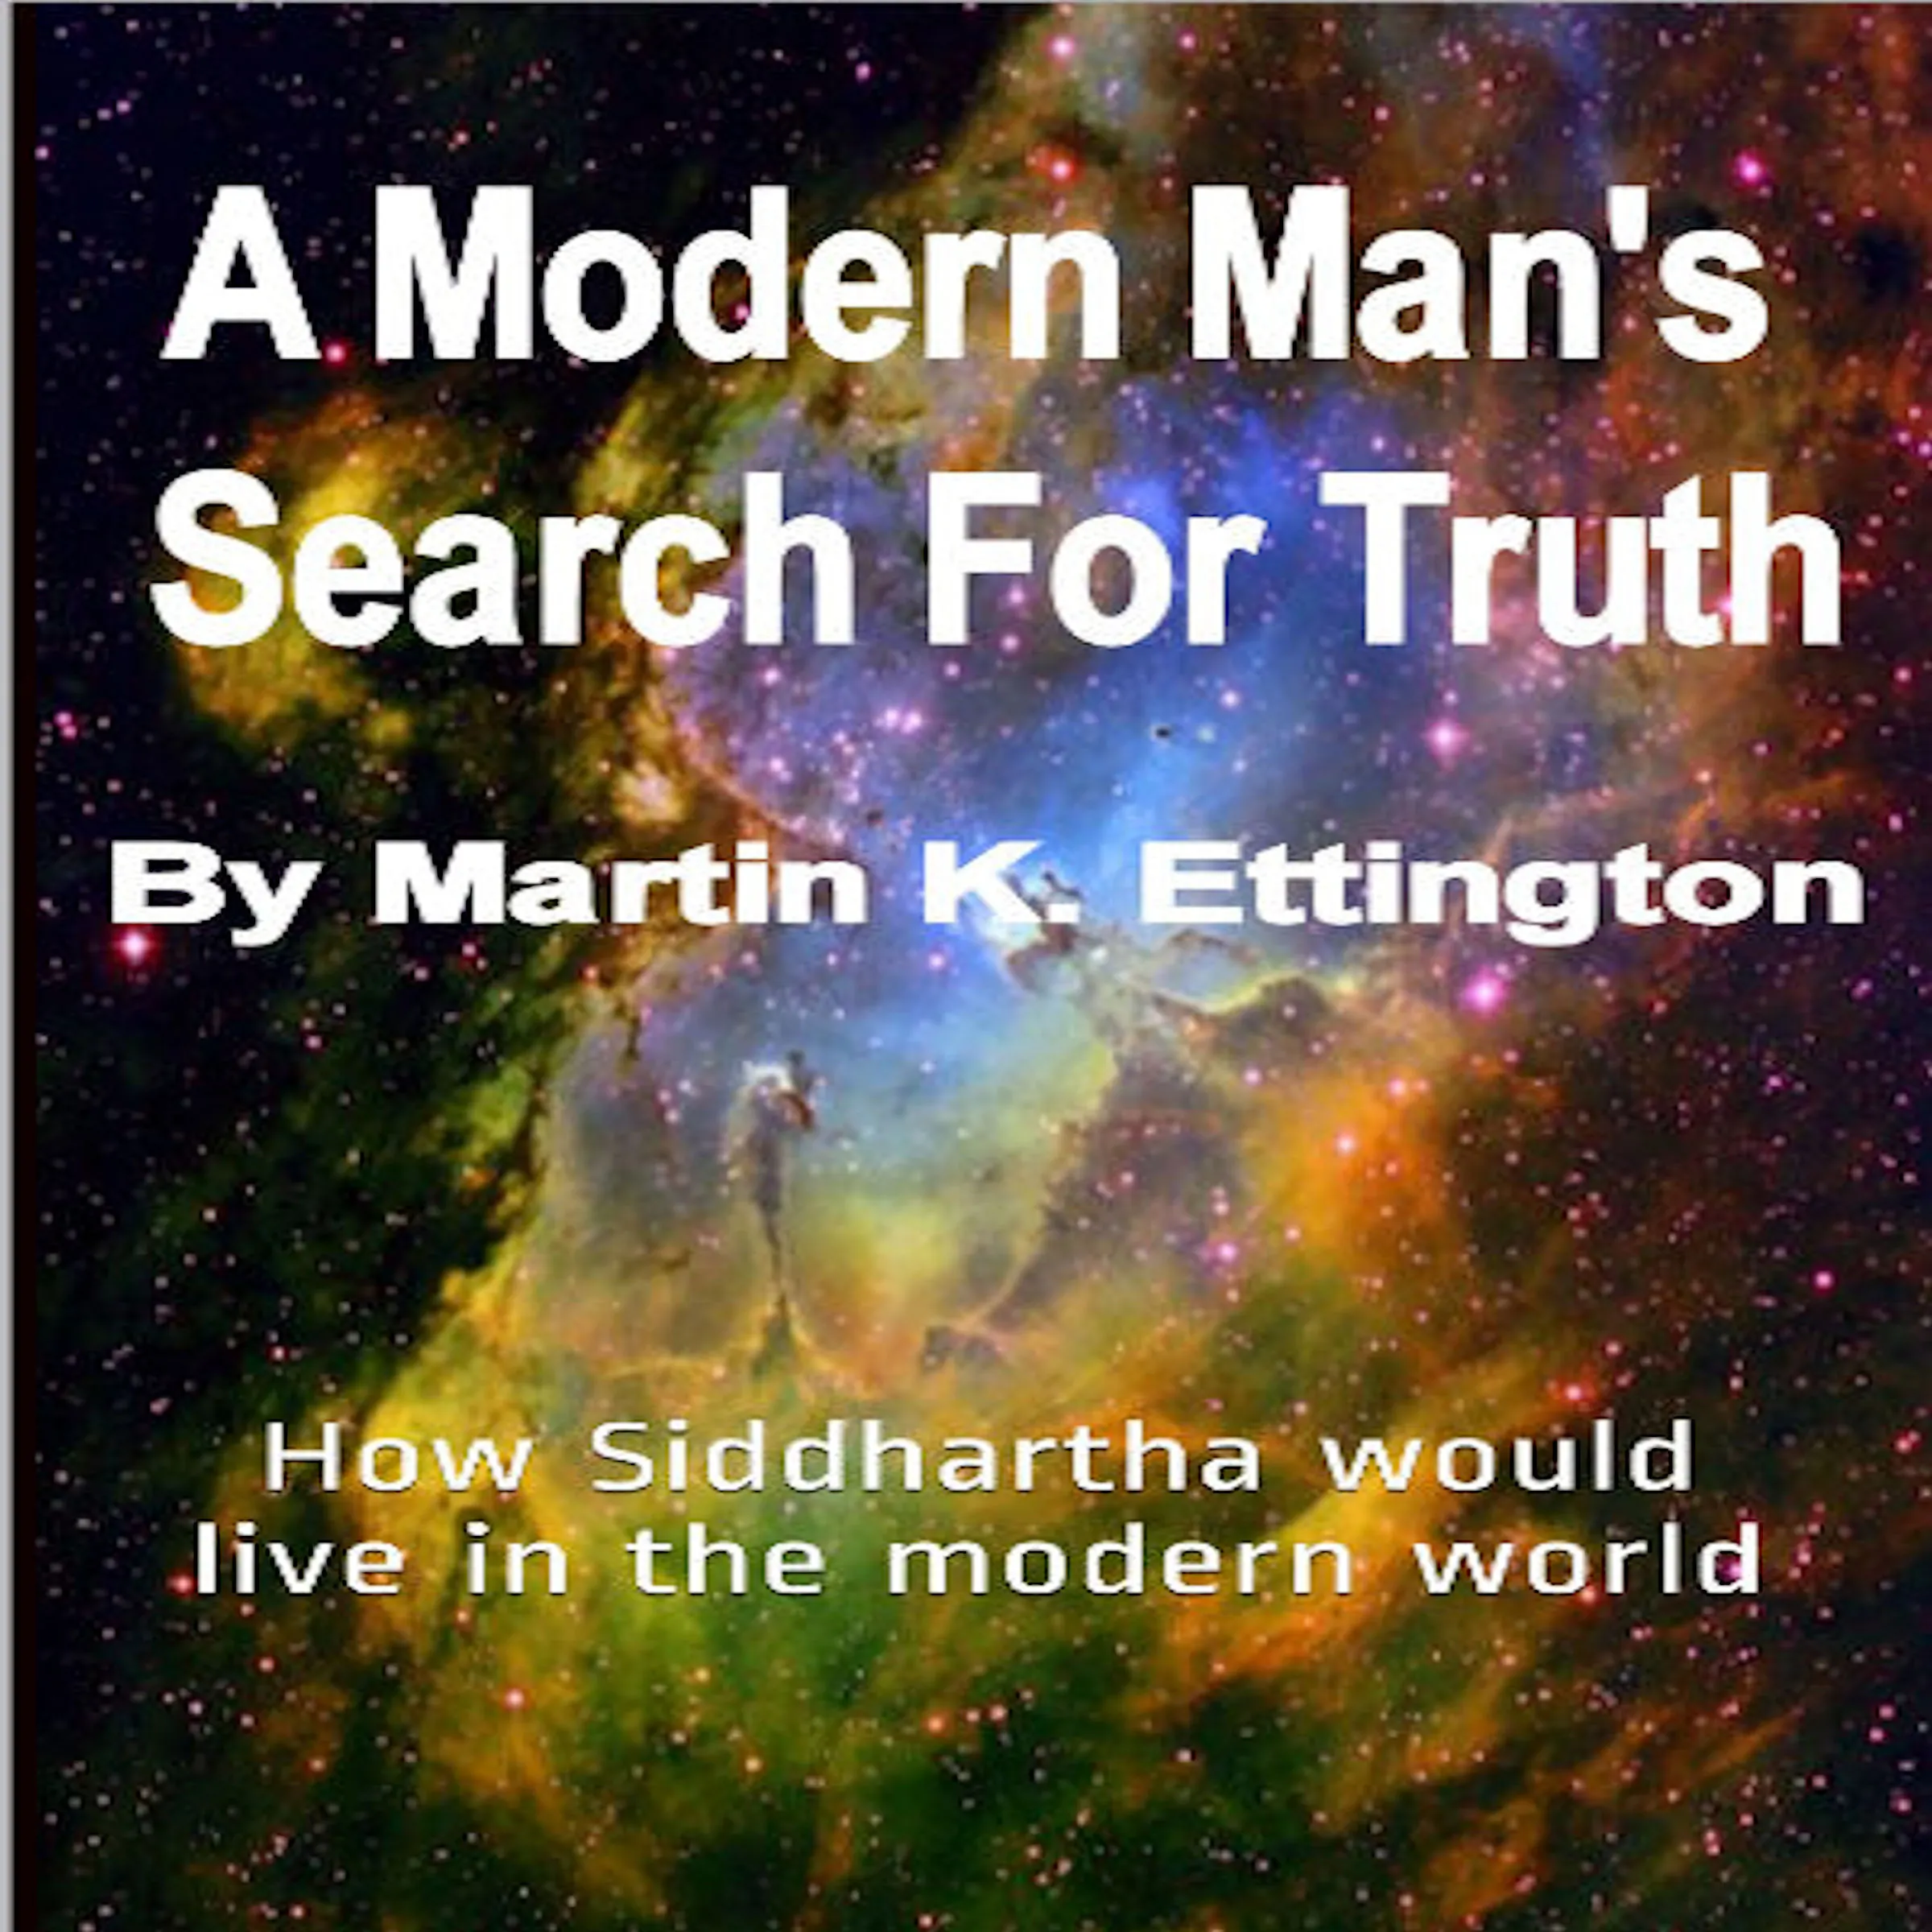 A Modern Man's Search for Truth Audiobook by Martin K. Ettington